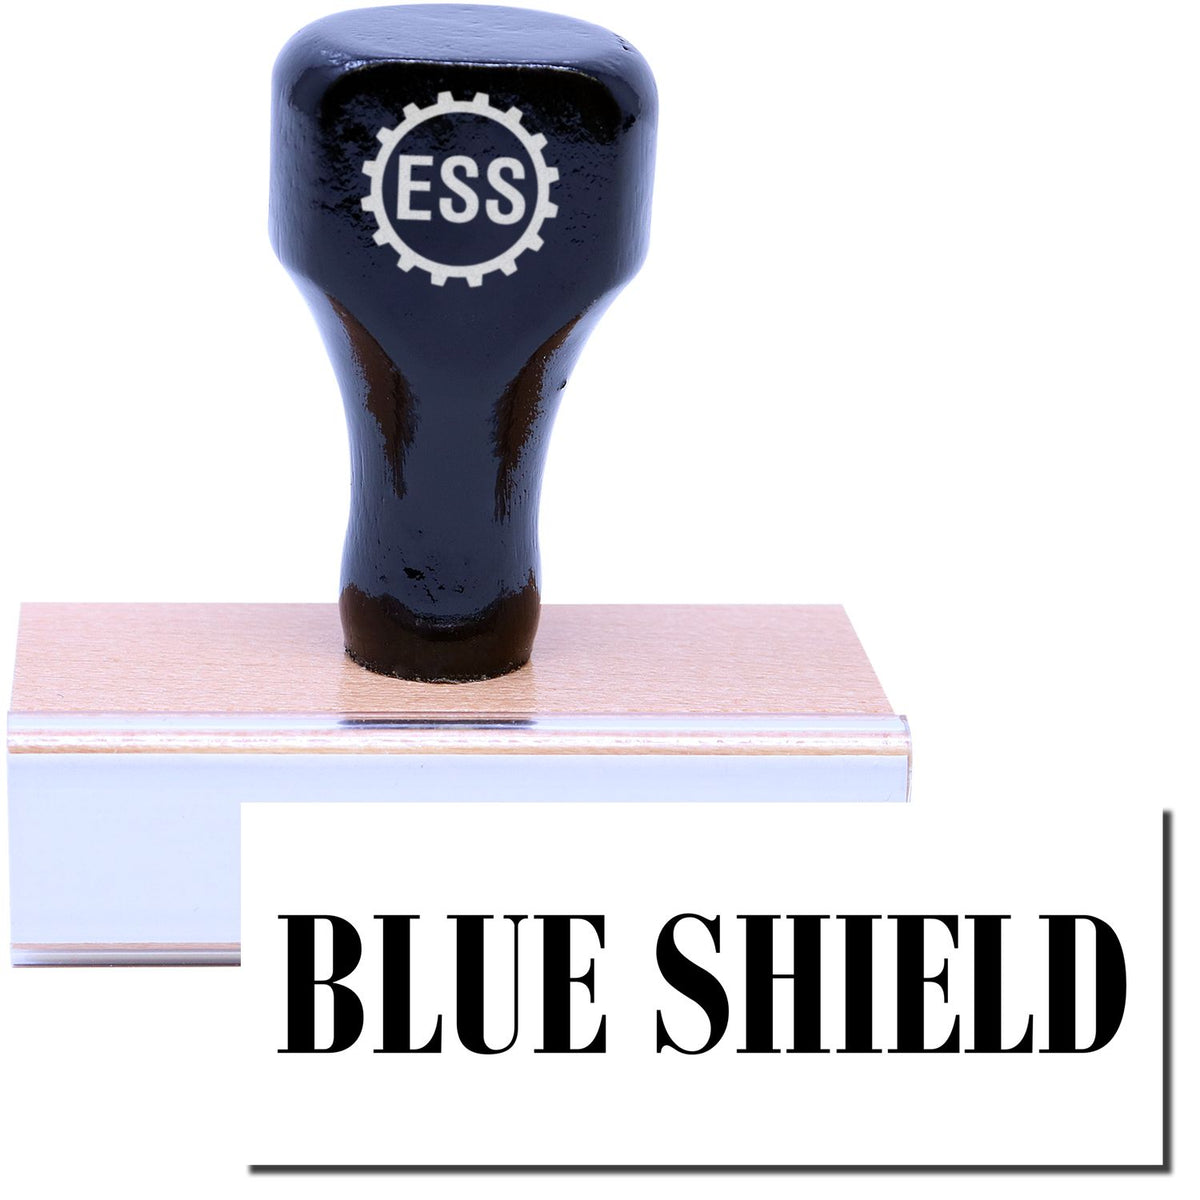 A stock office medical rubber stamp with a stamped image showing how the text &quot;BLUE SHIELD&quot; is displayed after stamping.